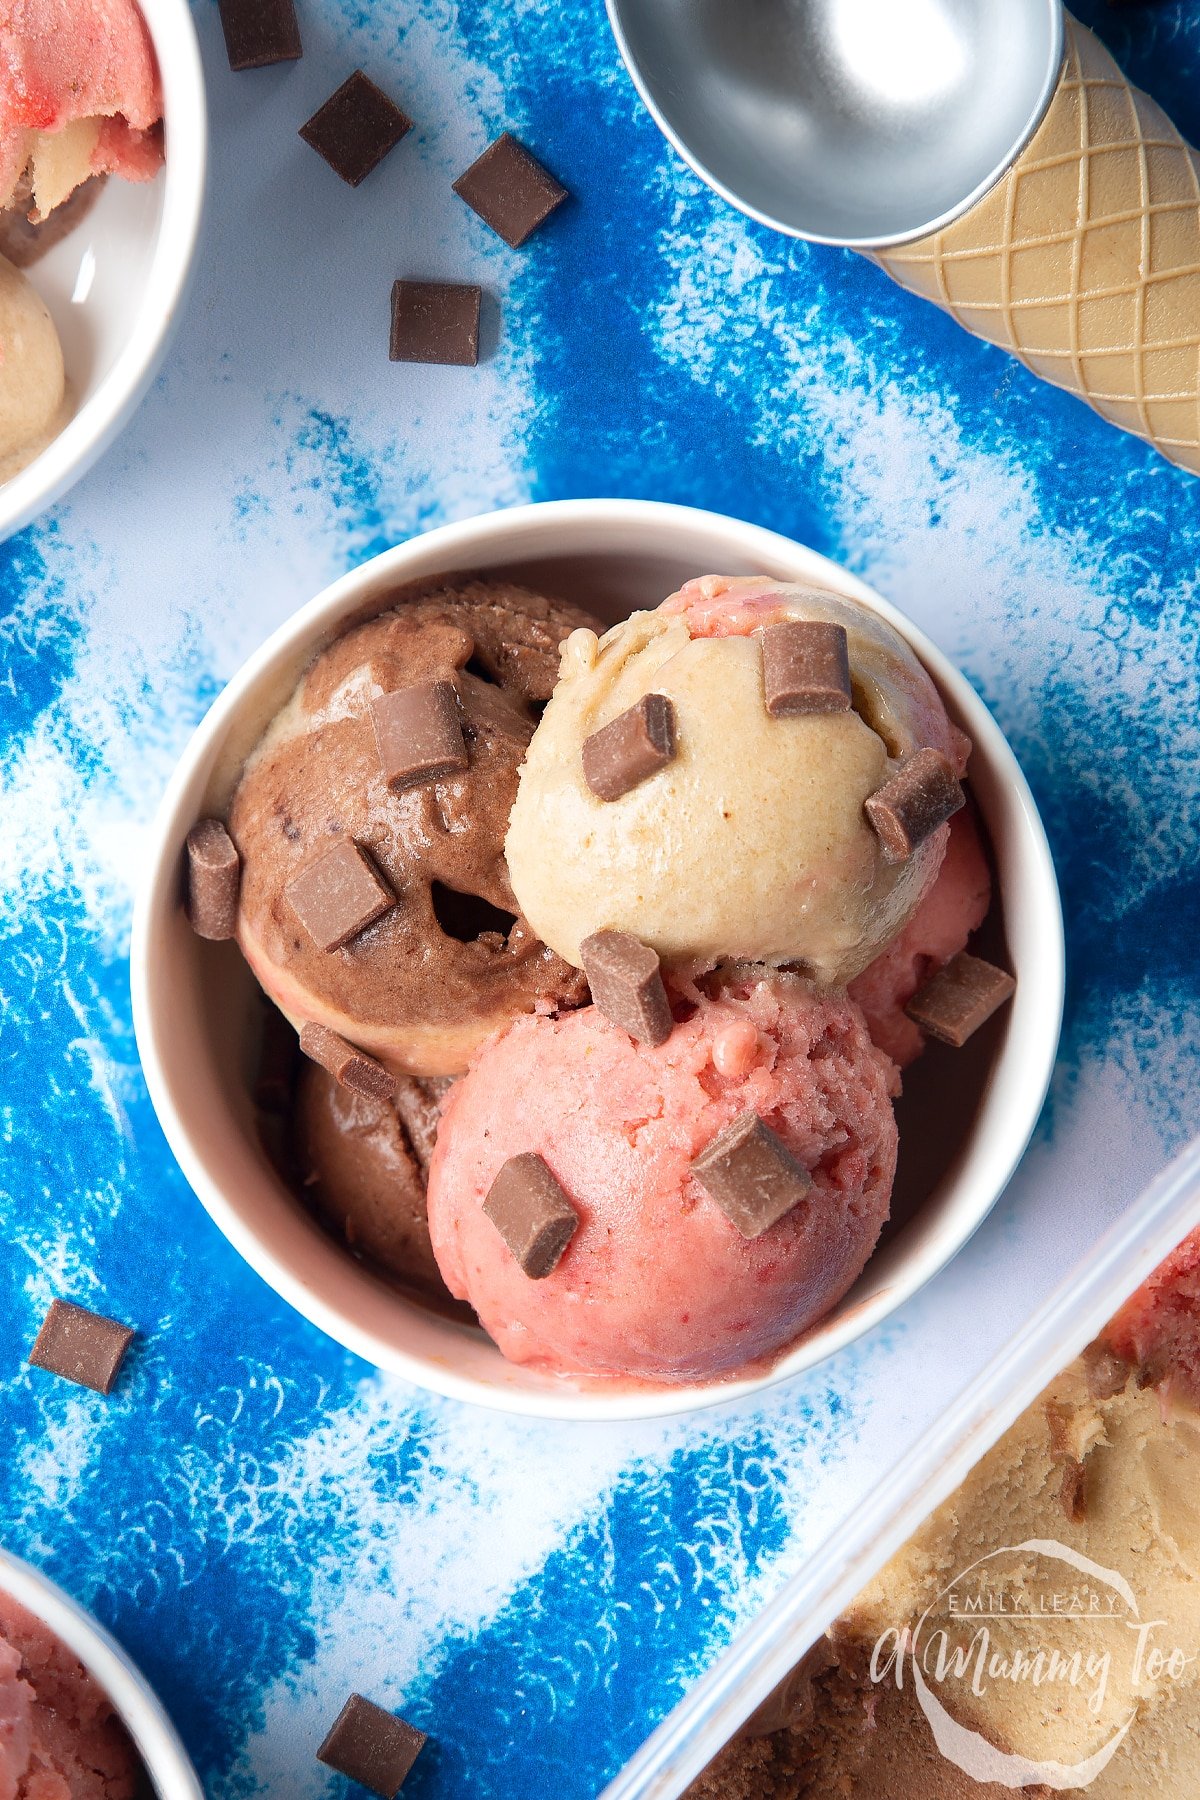 Close up of dairy-free Neapolitan ice cream served in a small white bowl, topped with chocolate chips.